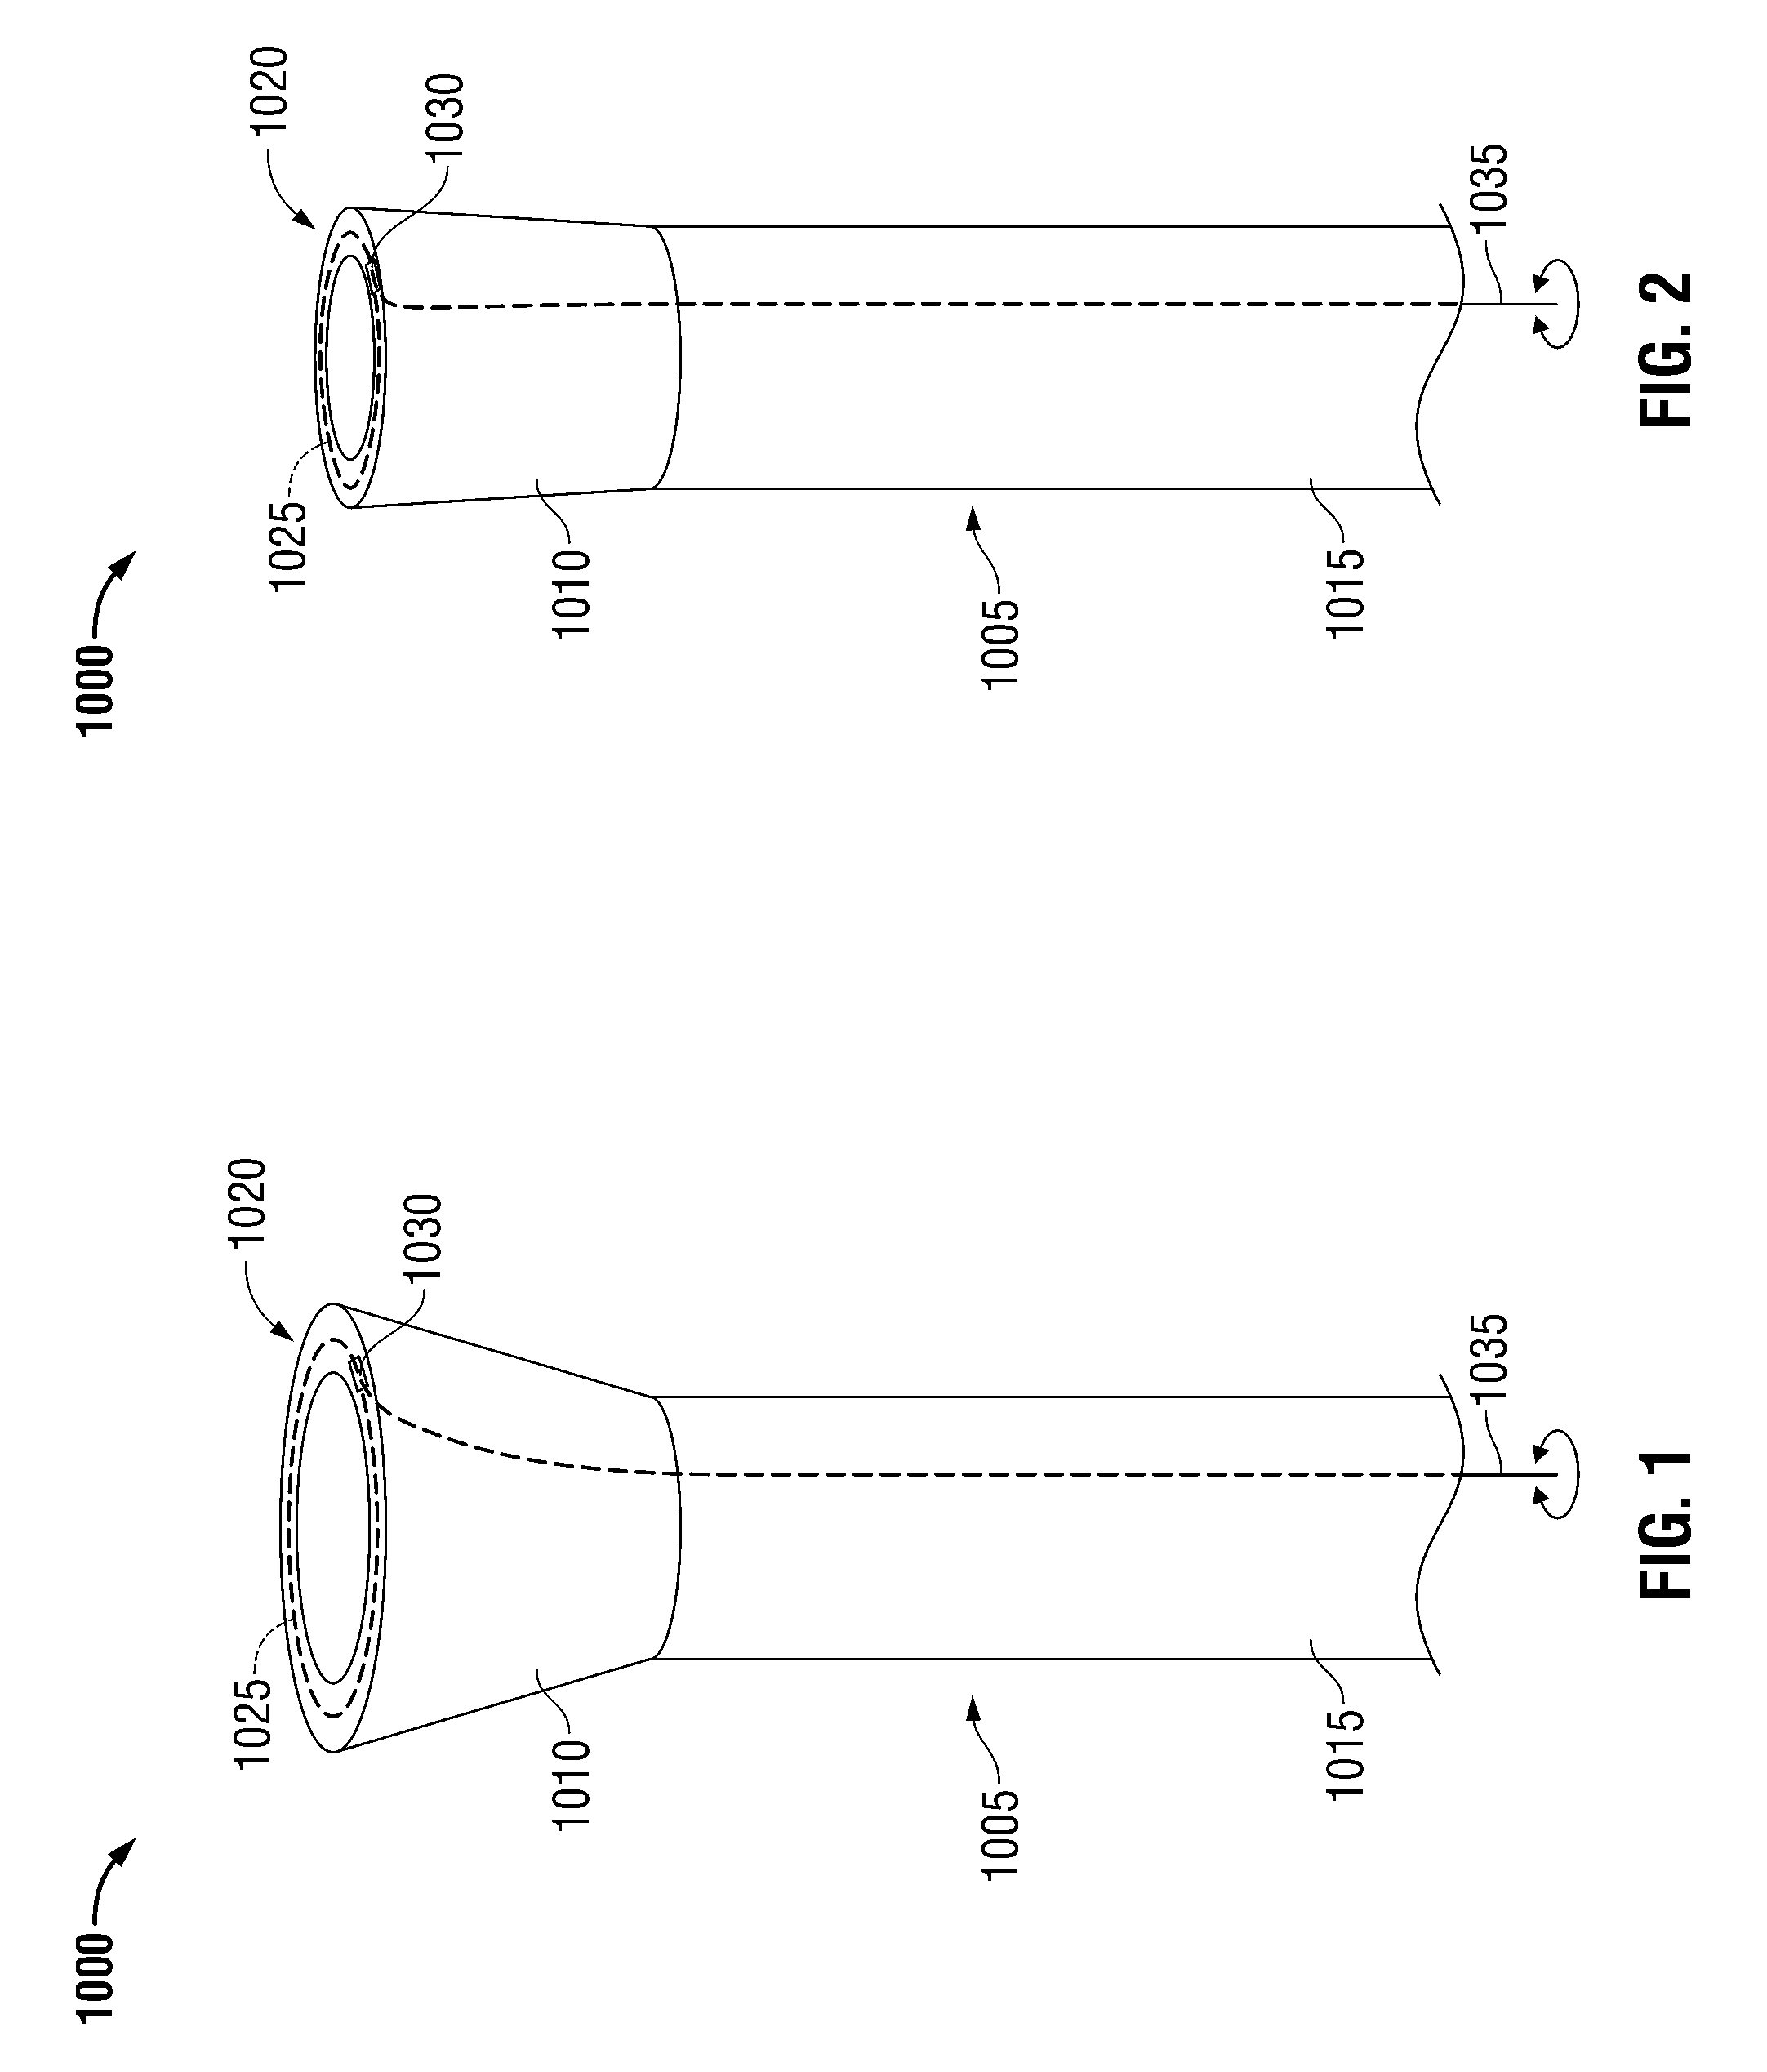 Surgical implant devices and methods for their manufacture and use